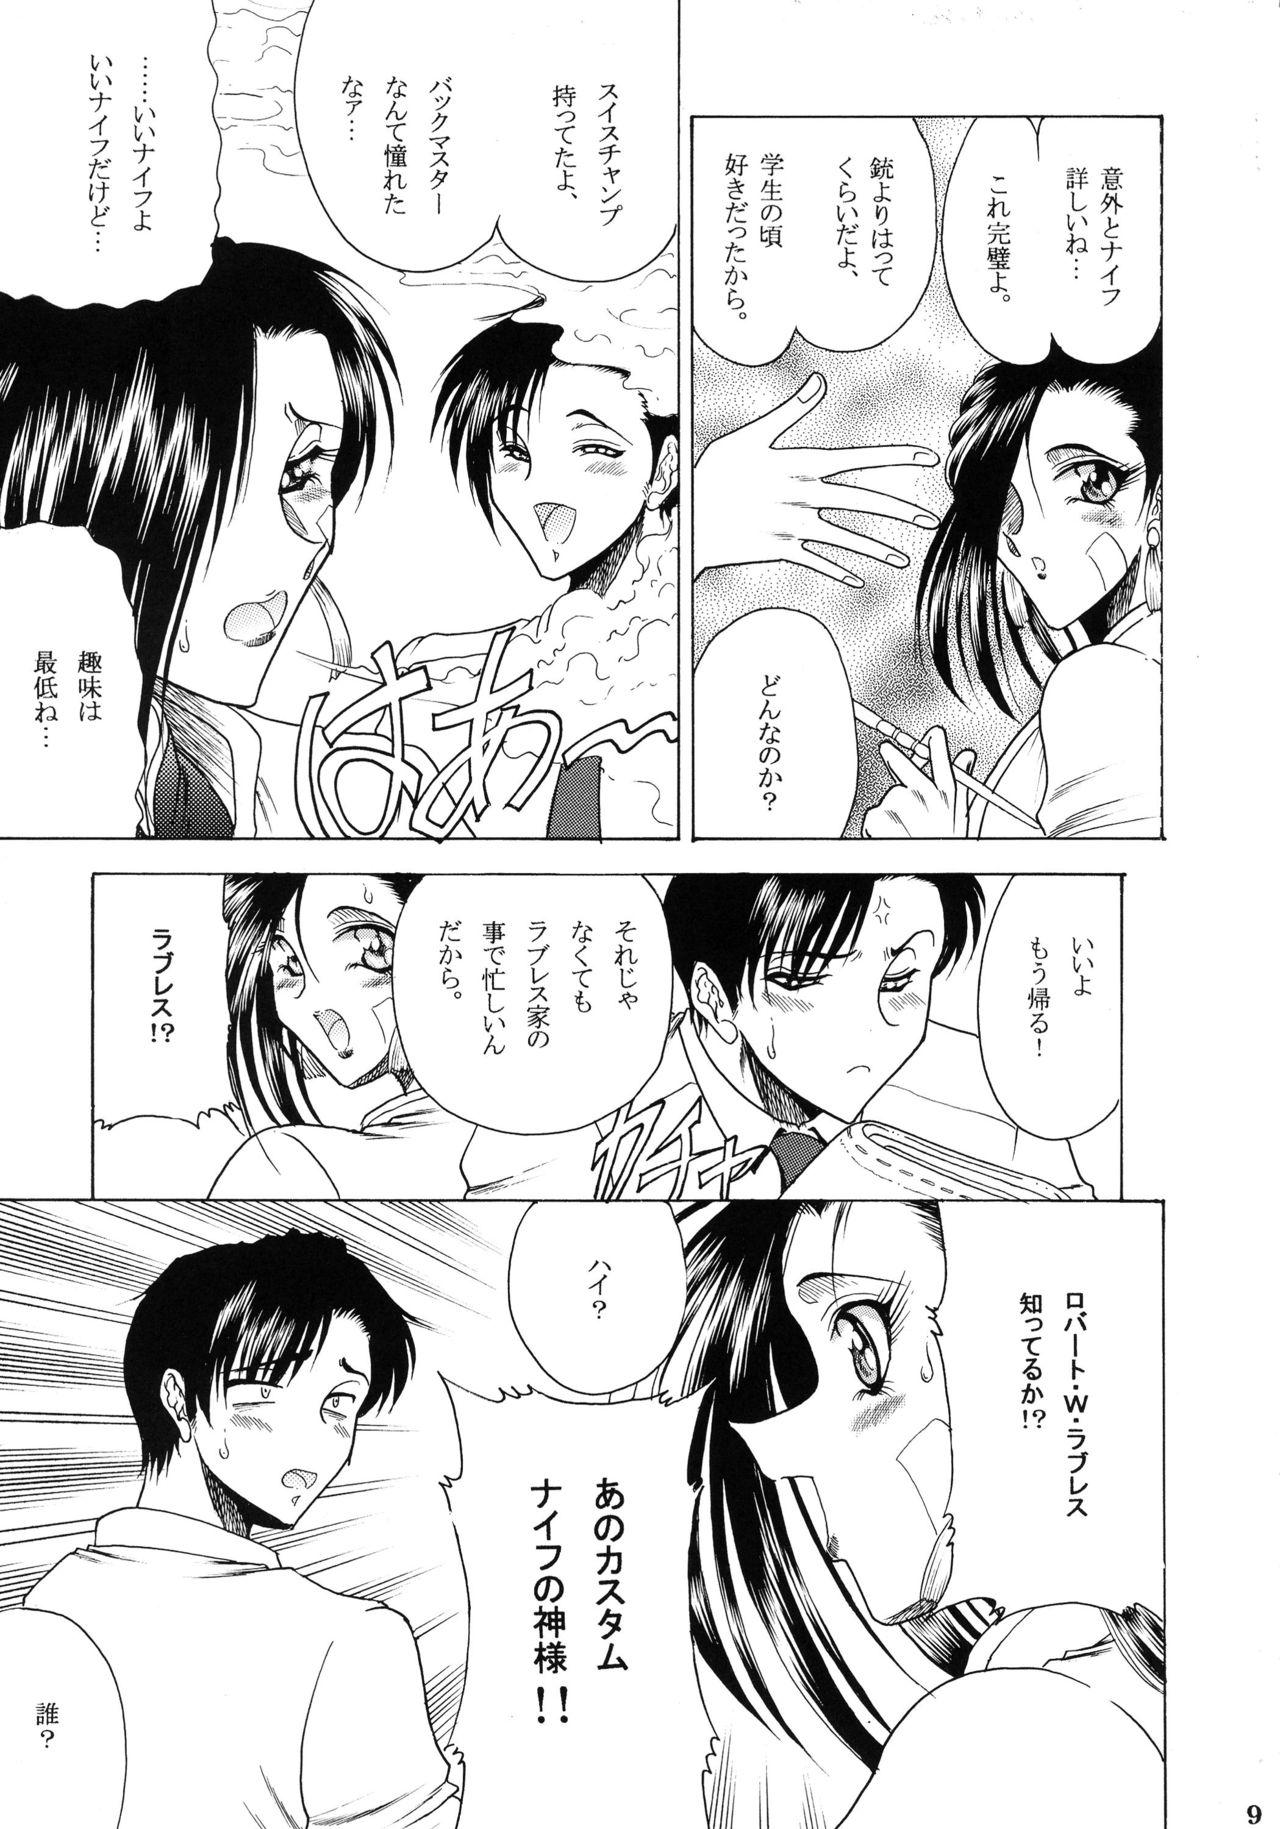 Best Blowjob ZONE 38 China Syndrome - Black lagoon Emo - Page 8